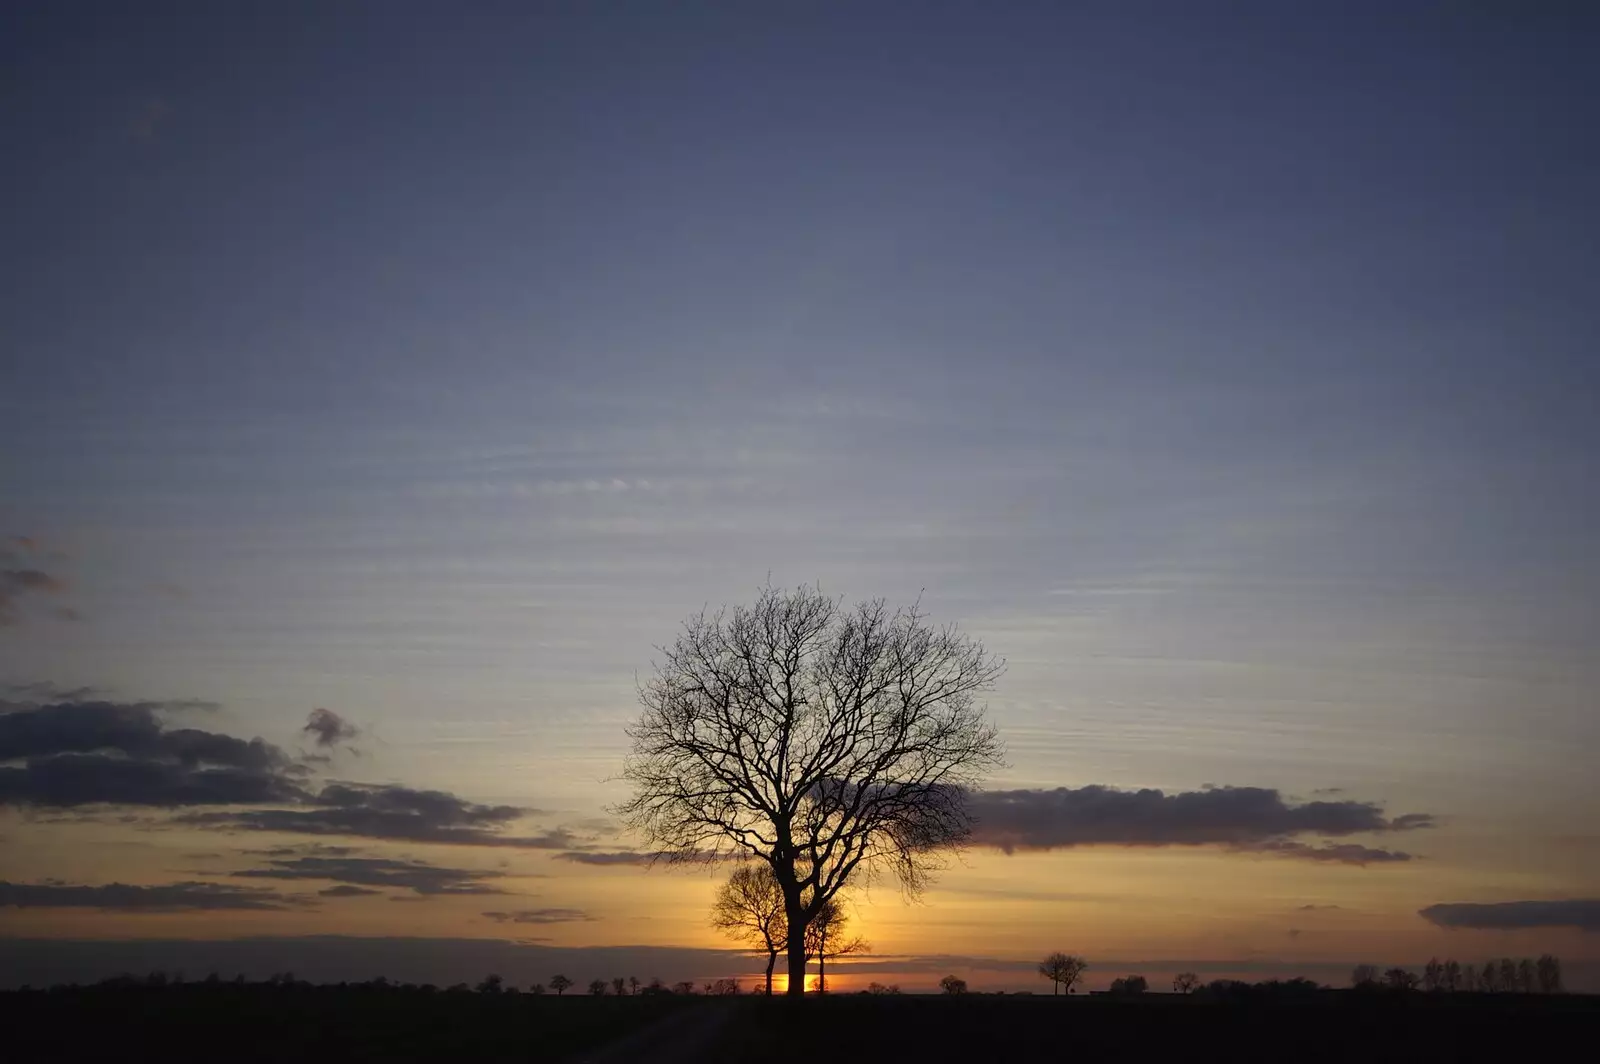 A lonely tree near Walsham le Willows, from A Night in the Salisbury Arms, Cambridge - 9th March 2007